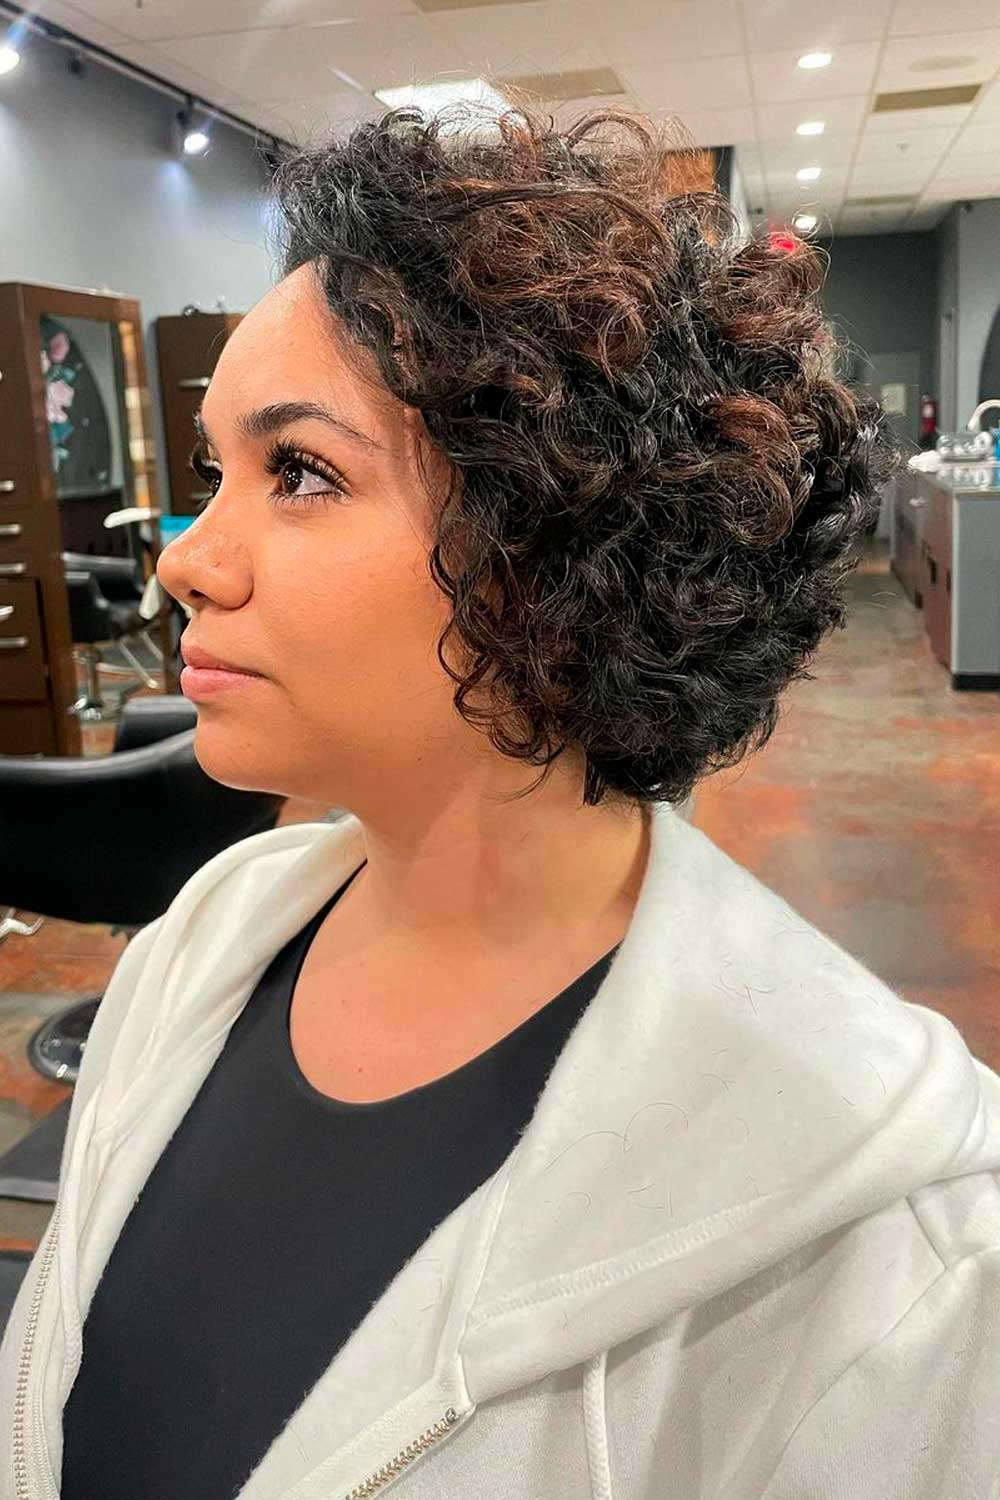 Curly Hair with Brown Highlights